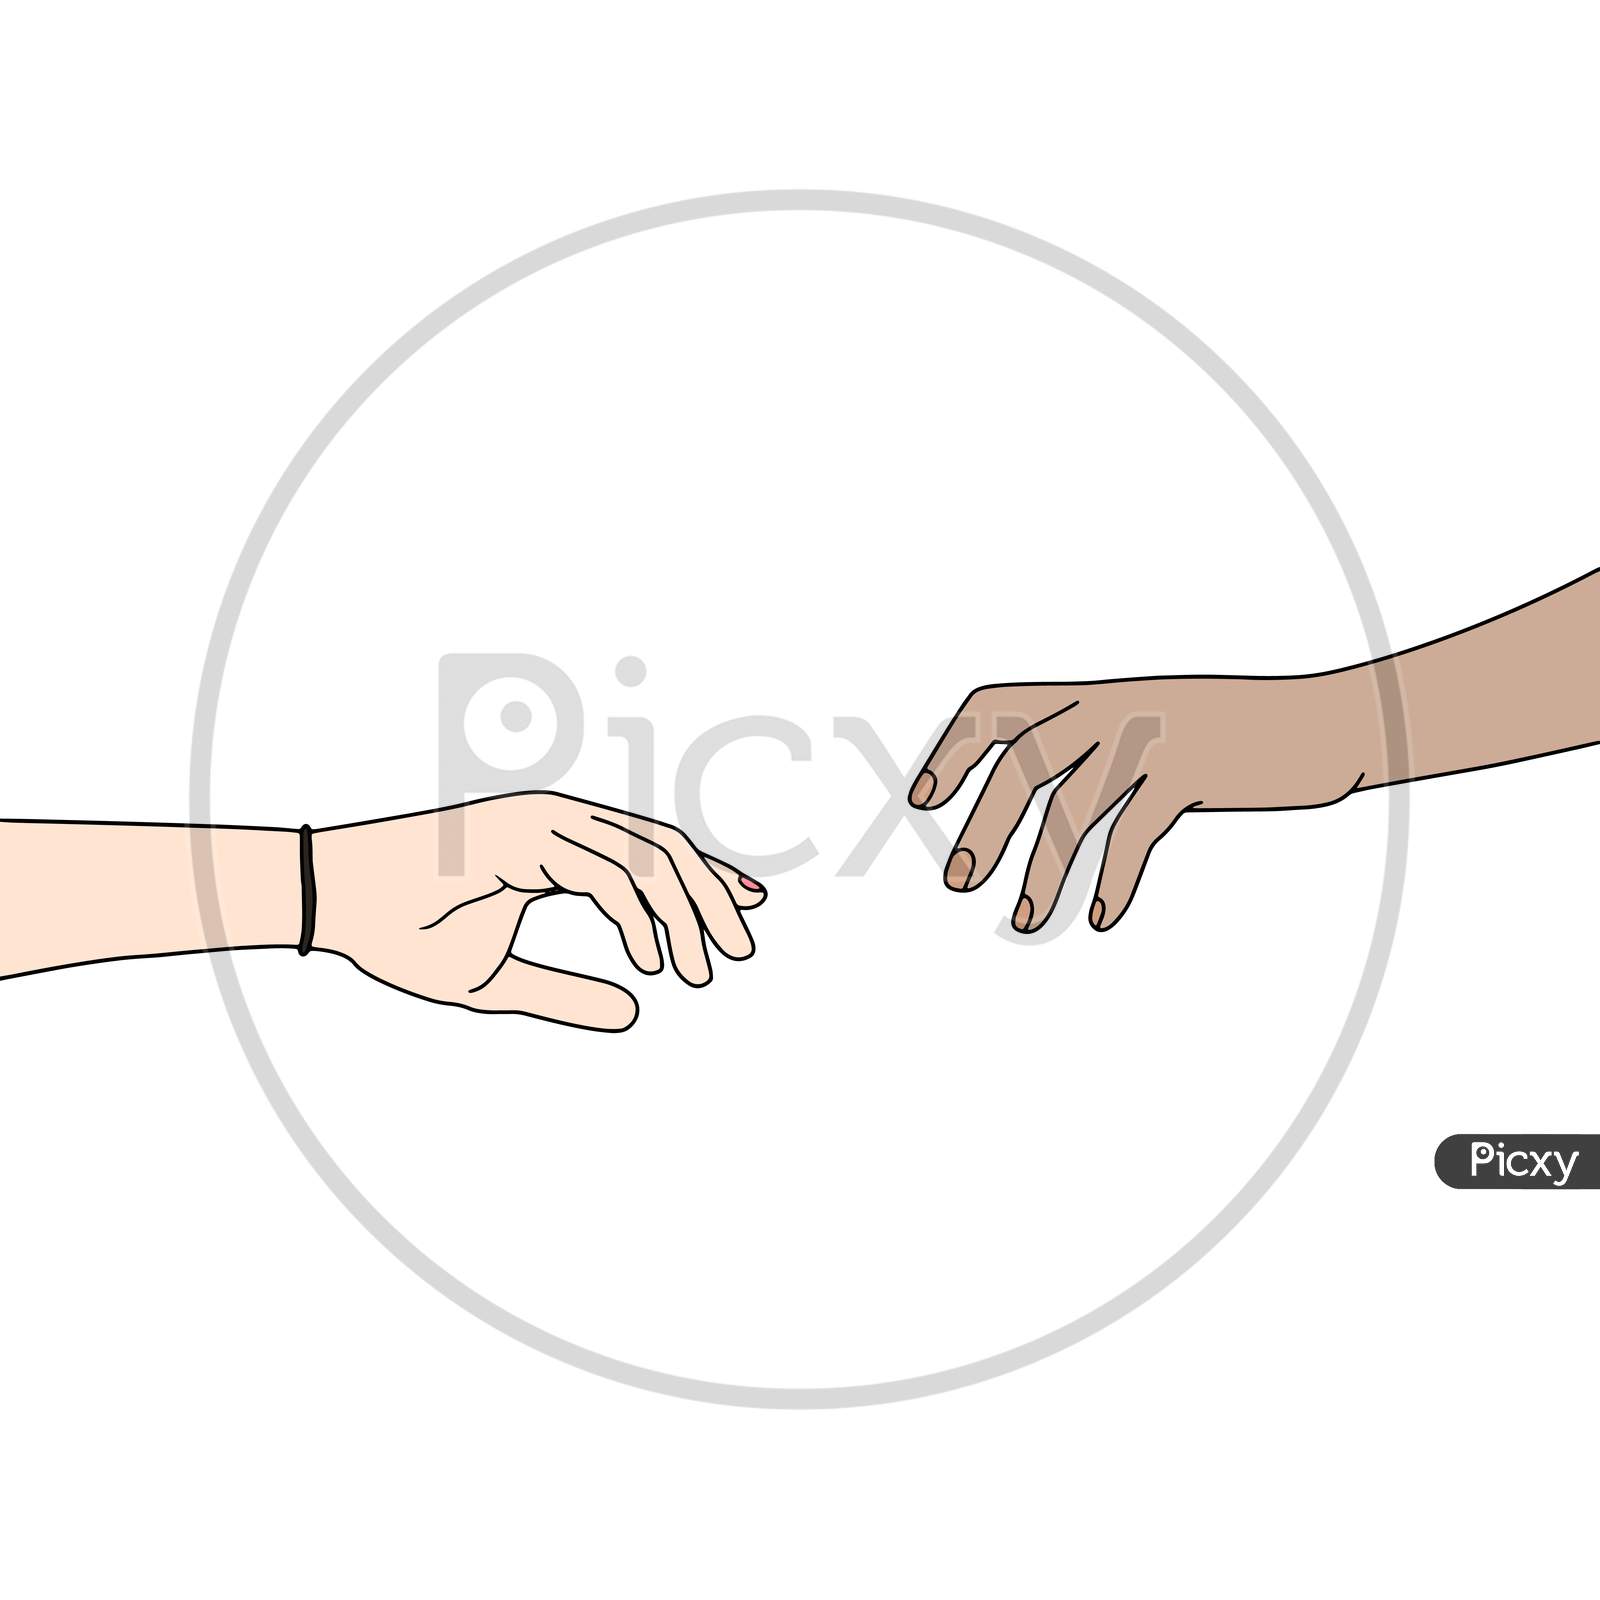 Two Hands Trying To Catch Each Other. Vector Illustration Of Two Hands On White Background. Isolated. Vector Illustration For Poster, Banner, Advertisement, Web Background, Promotion Activities.